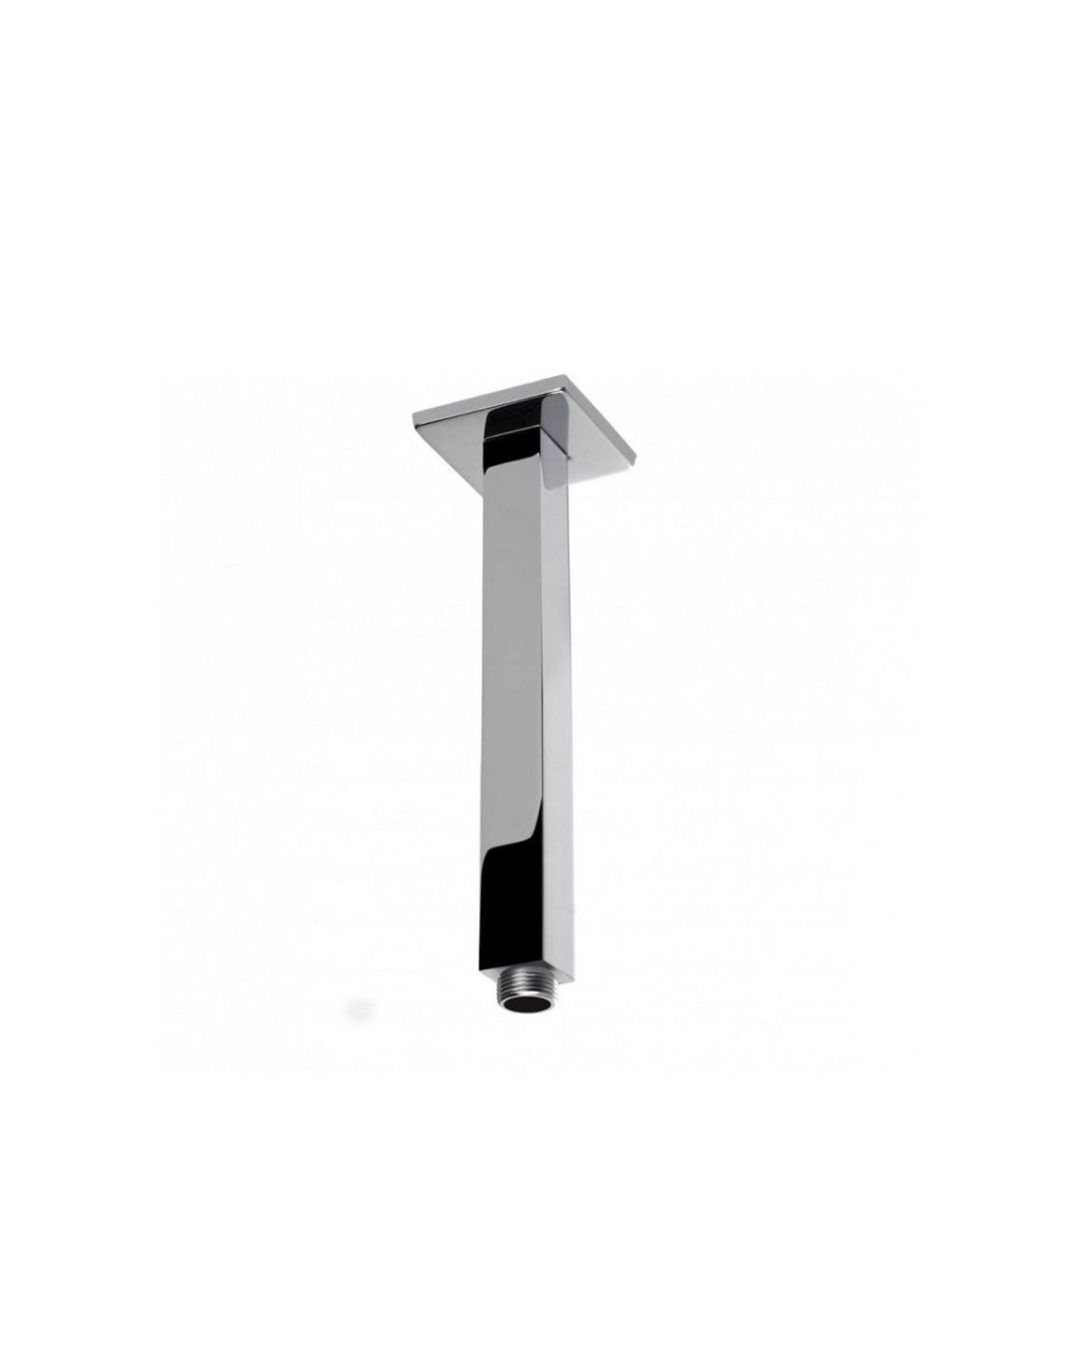 Square Ceiling Shower Arm 200mm